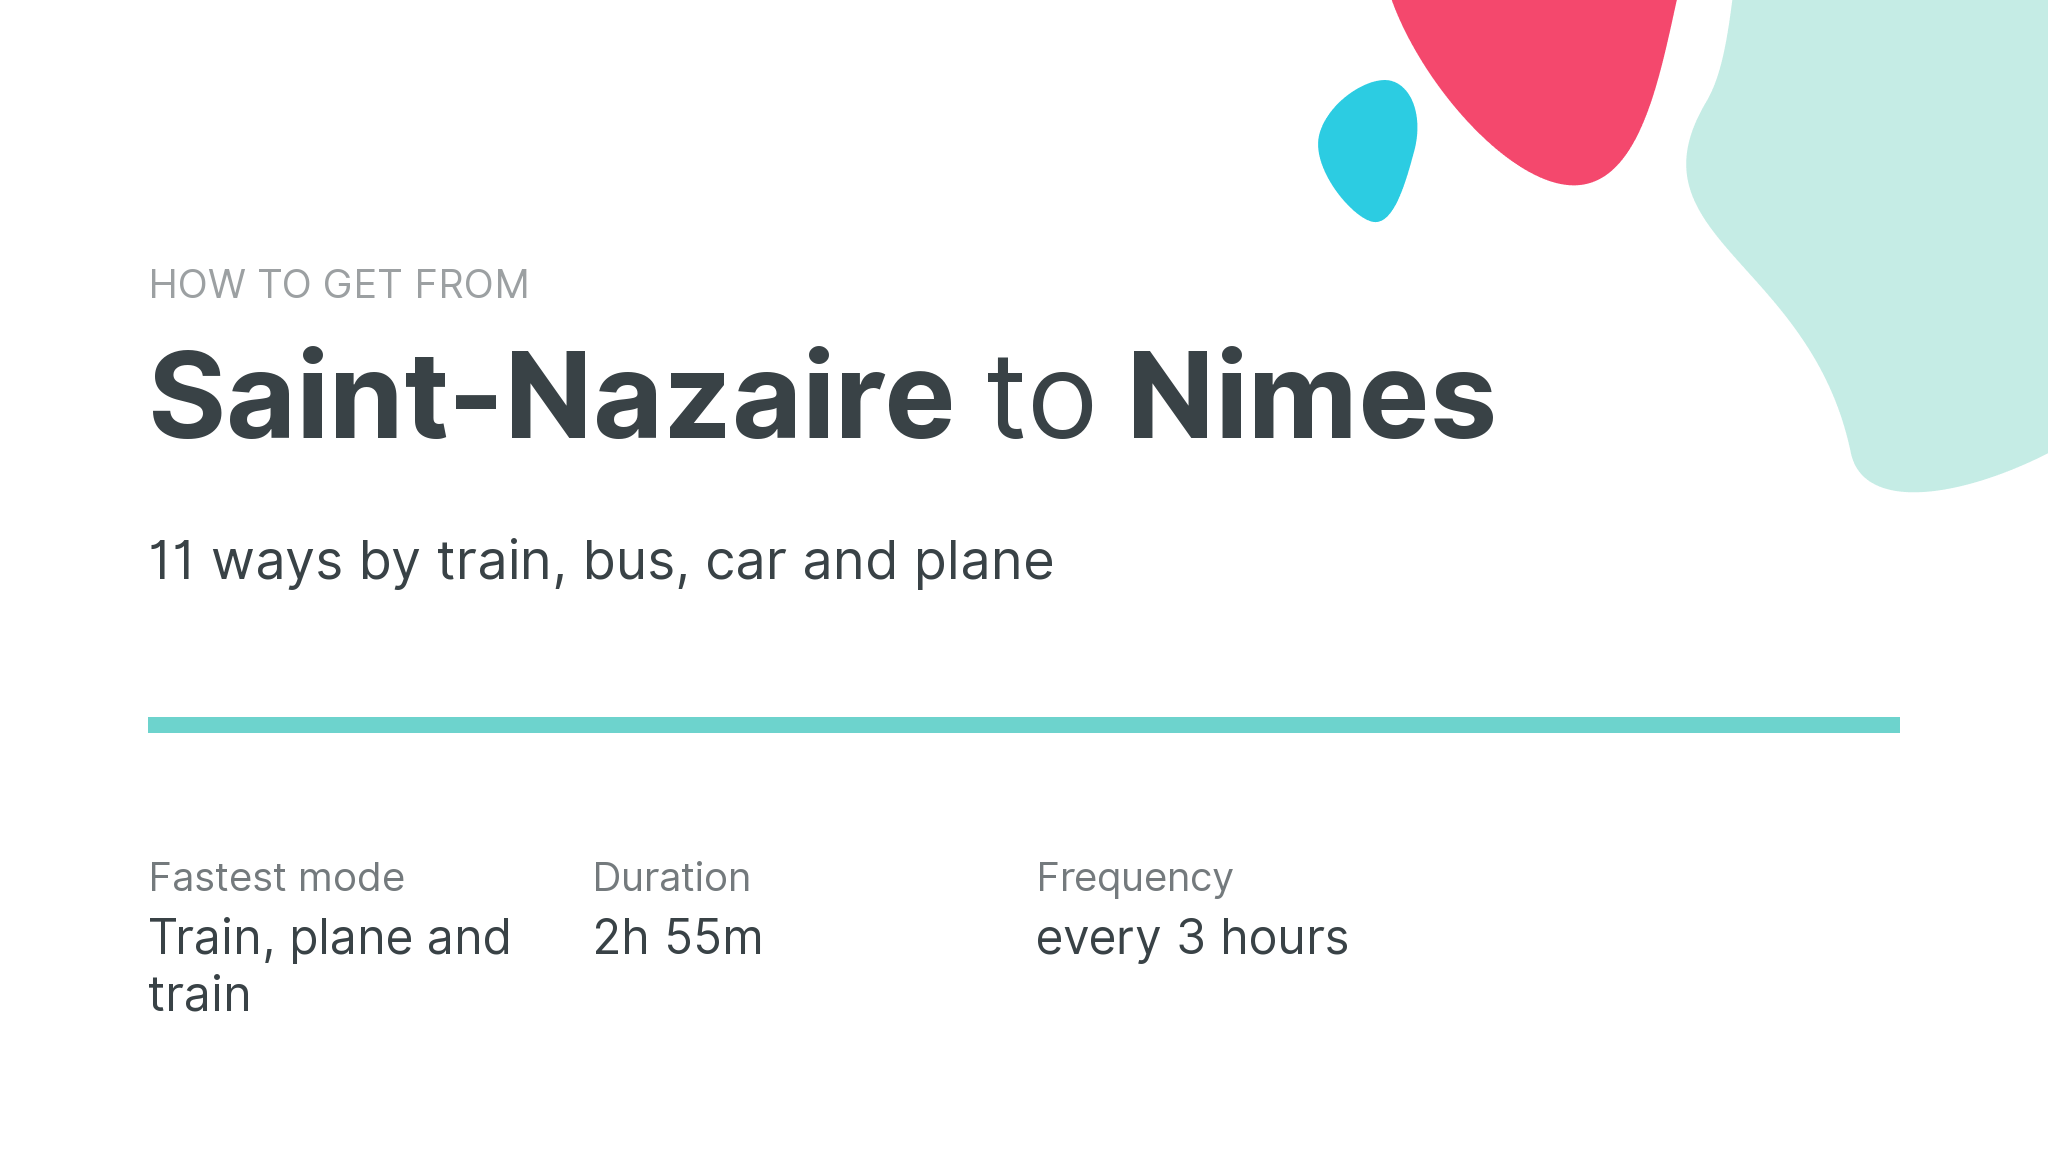 How do I get from Saint-Nazaire to Nimes